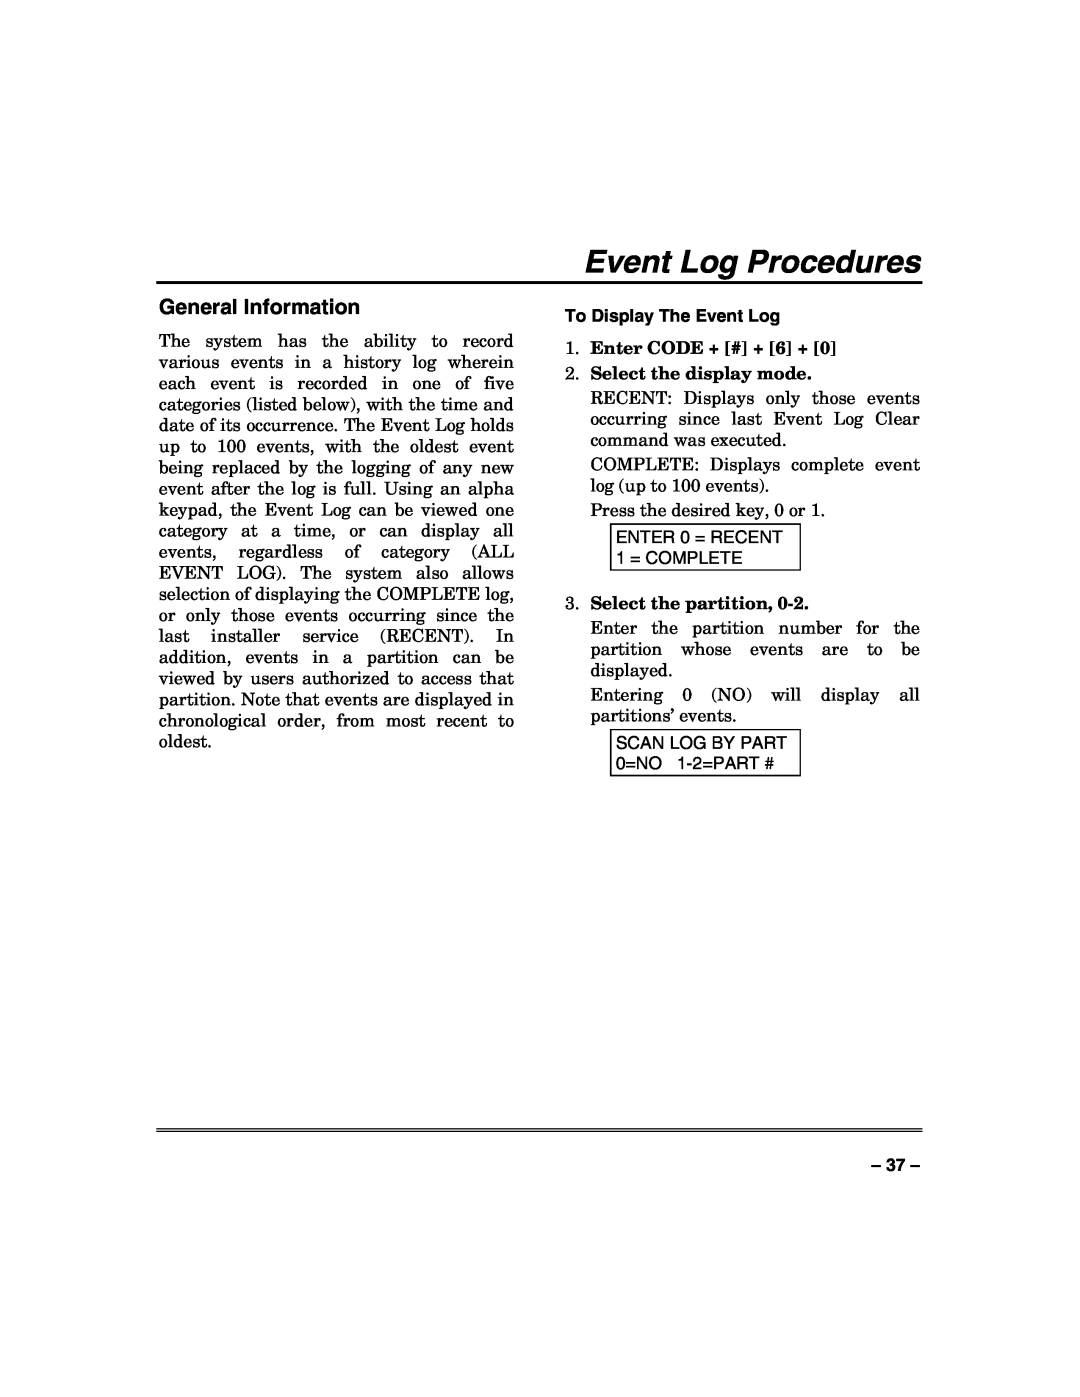 Honeywell N7003V3 manual Event Log Procedures, General Information, To Display The Event Log, Select the partition 